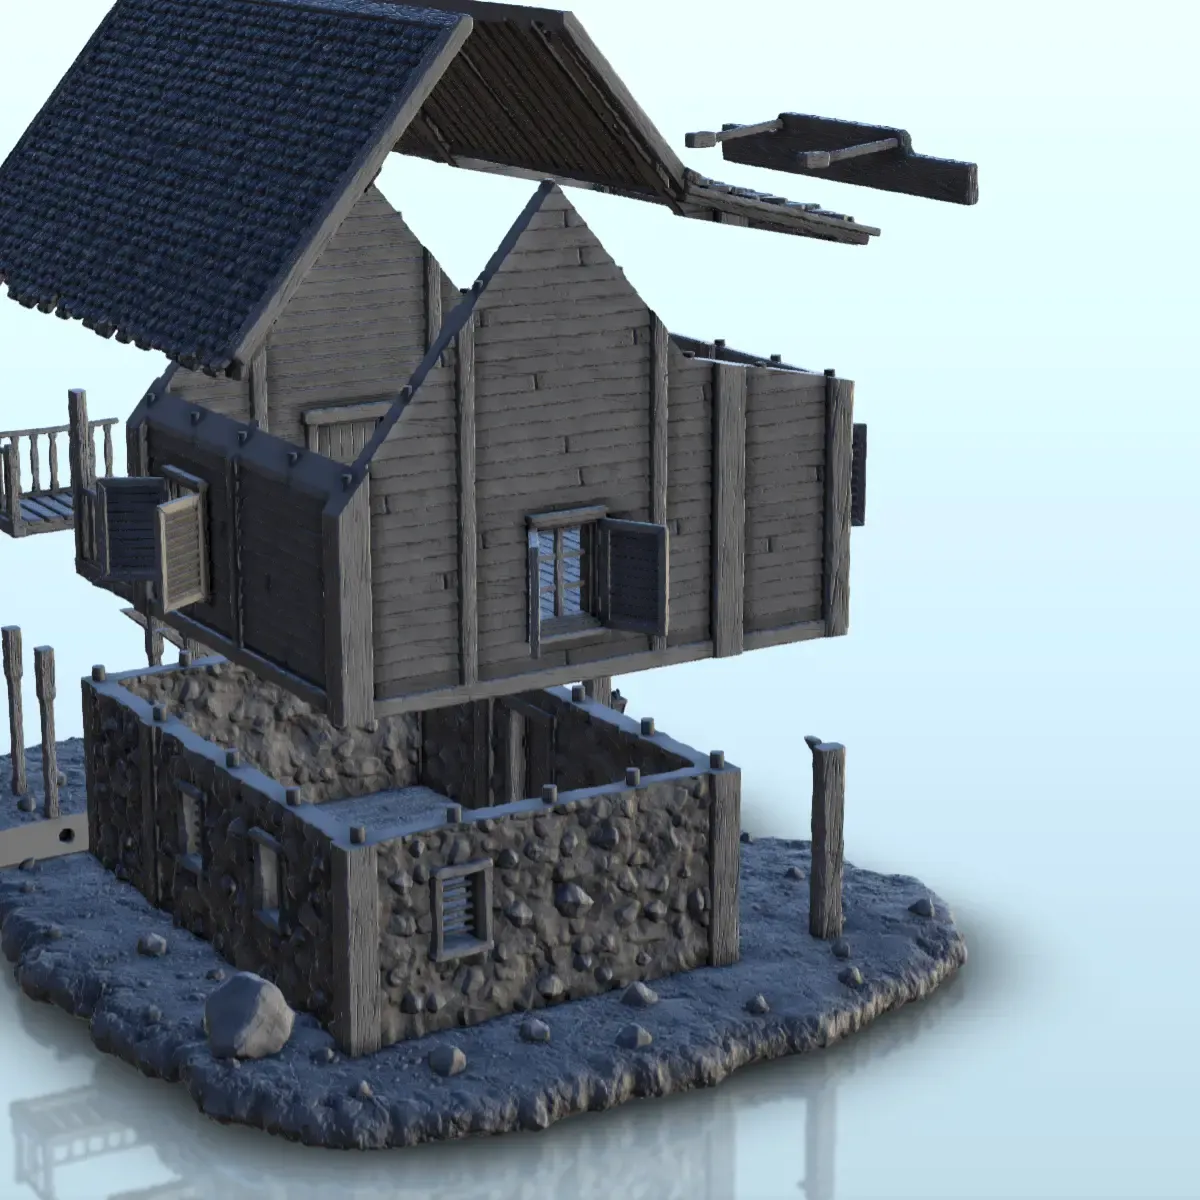 Sheriff's office in wood and stone with stairs - Terrain